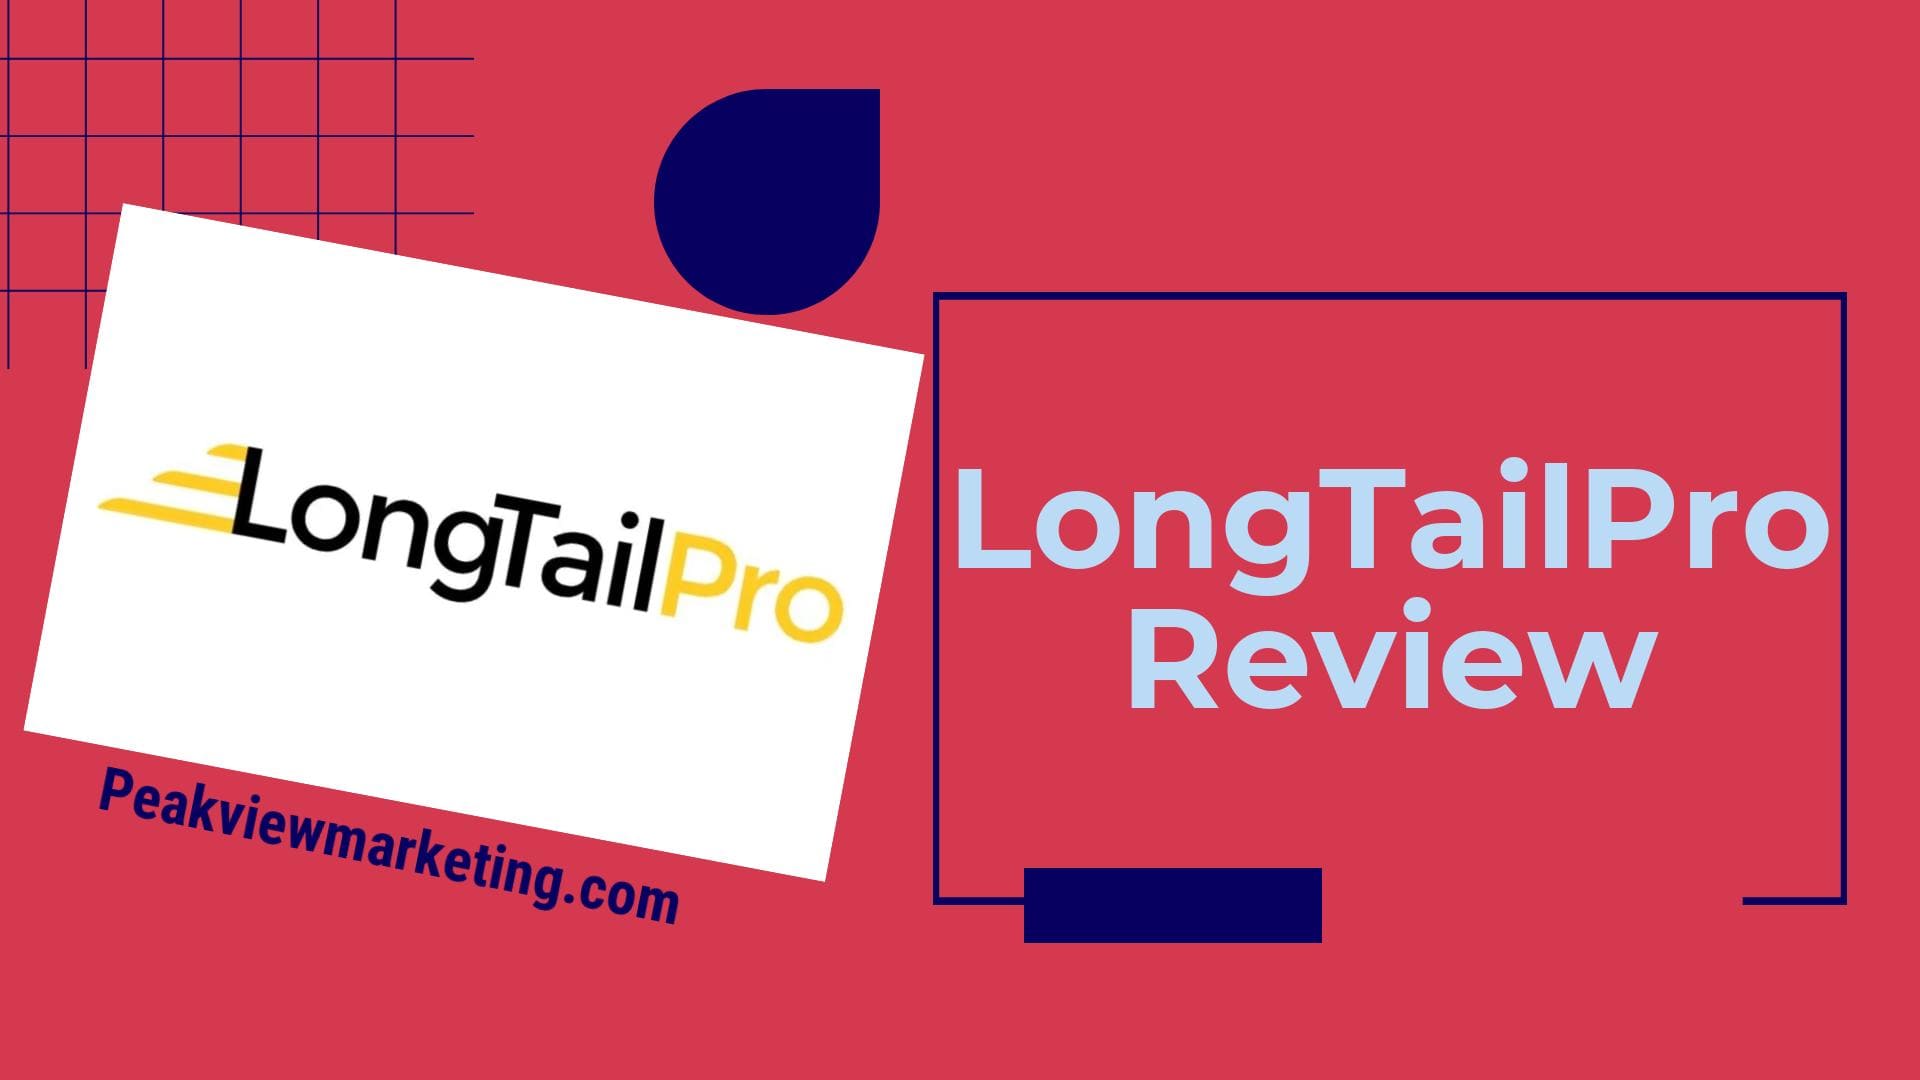 Longtail Pro Review Image